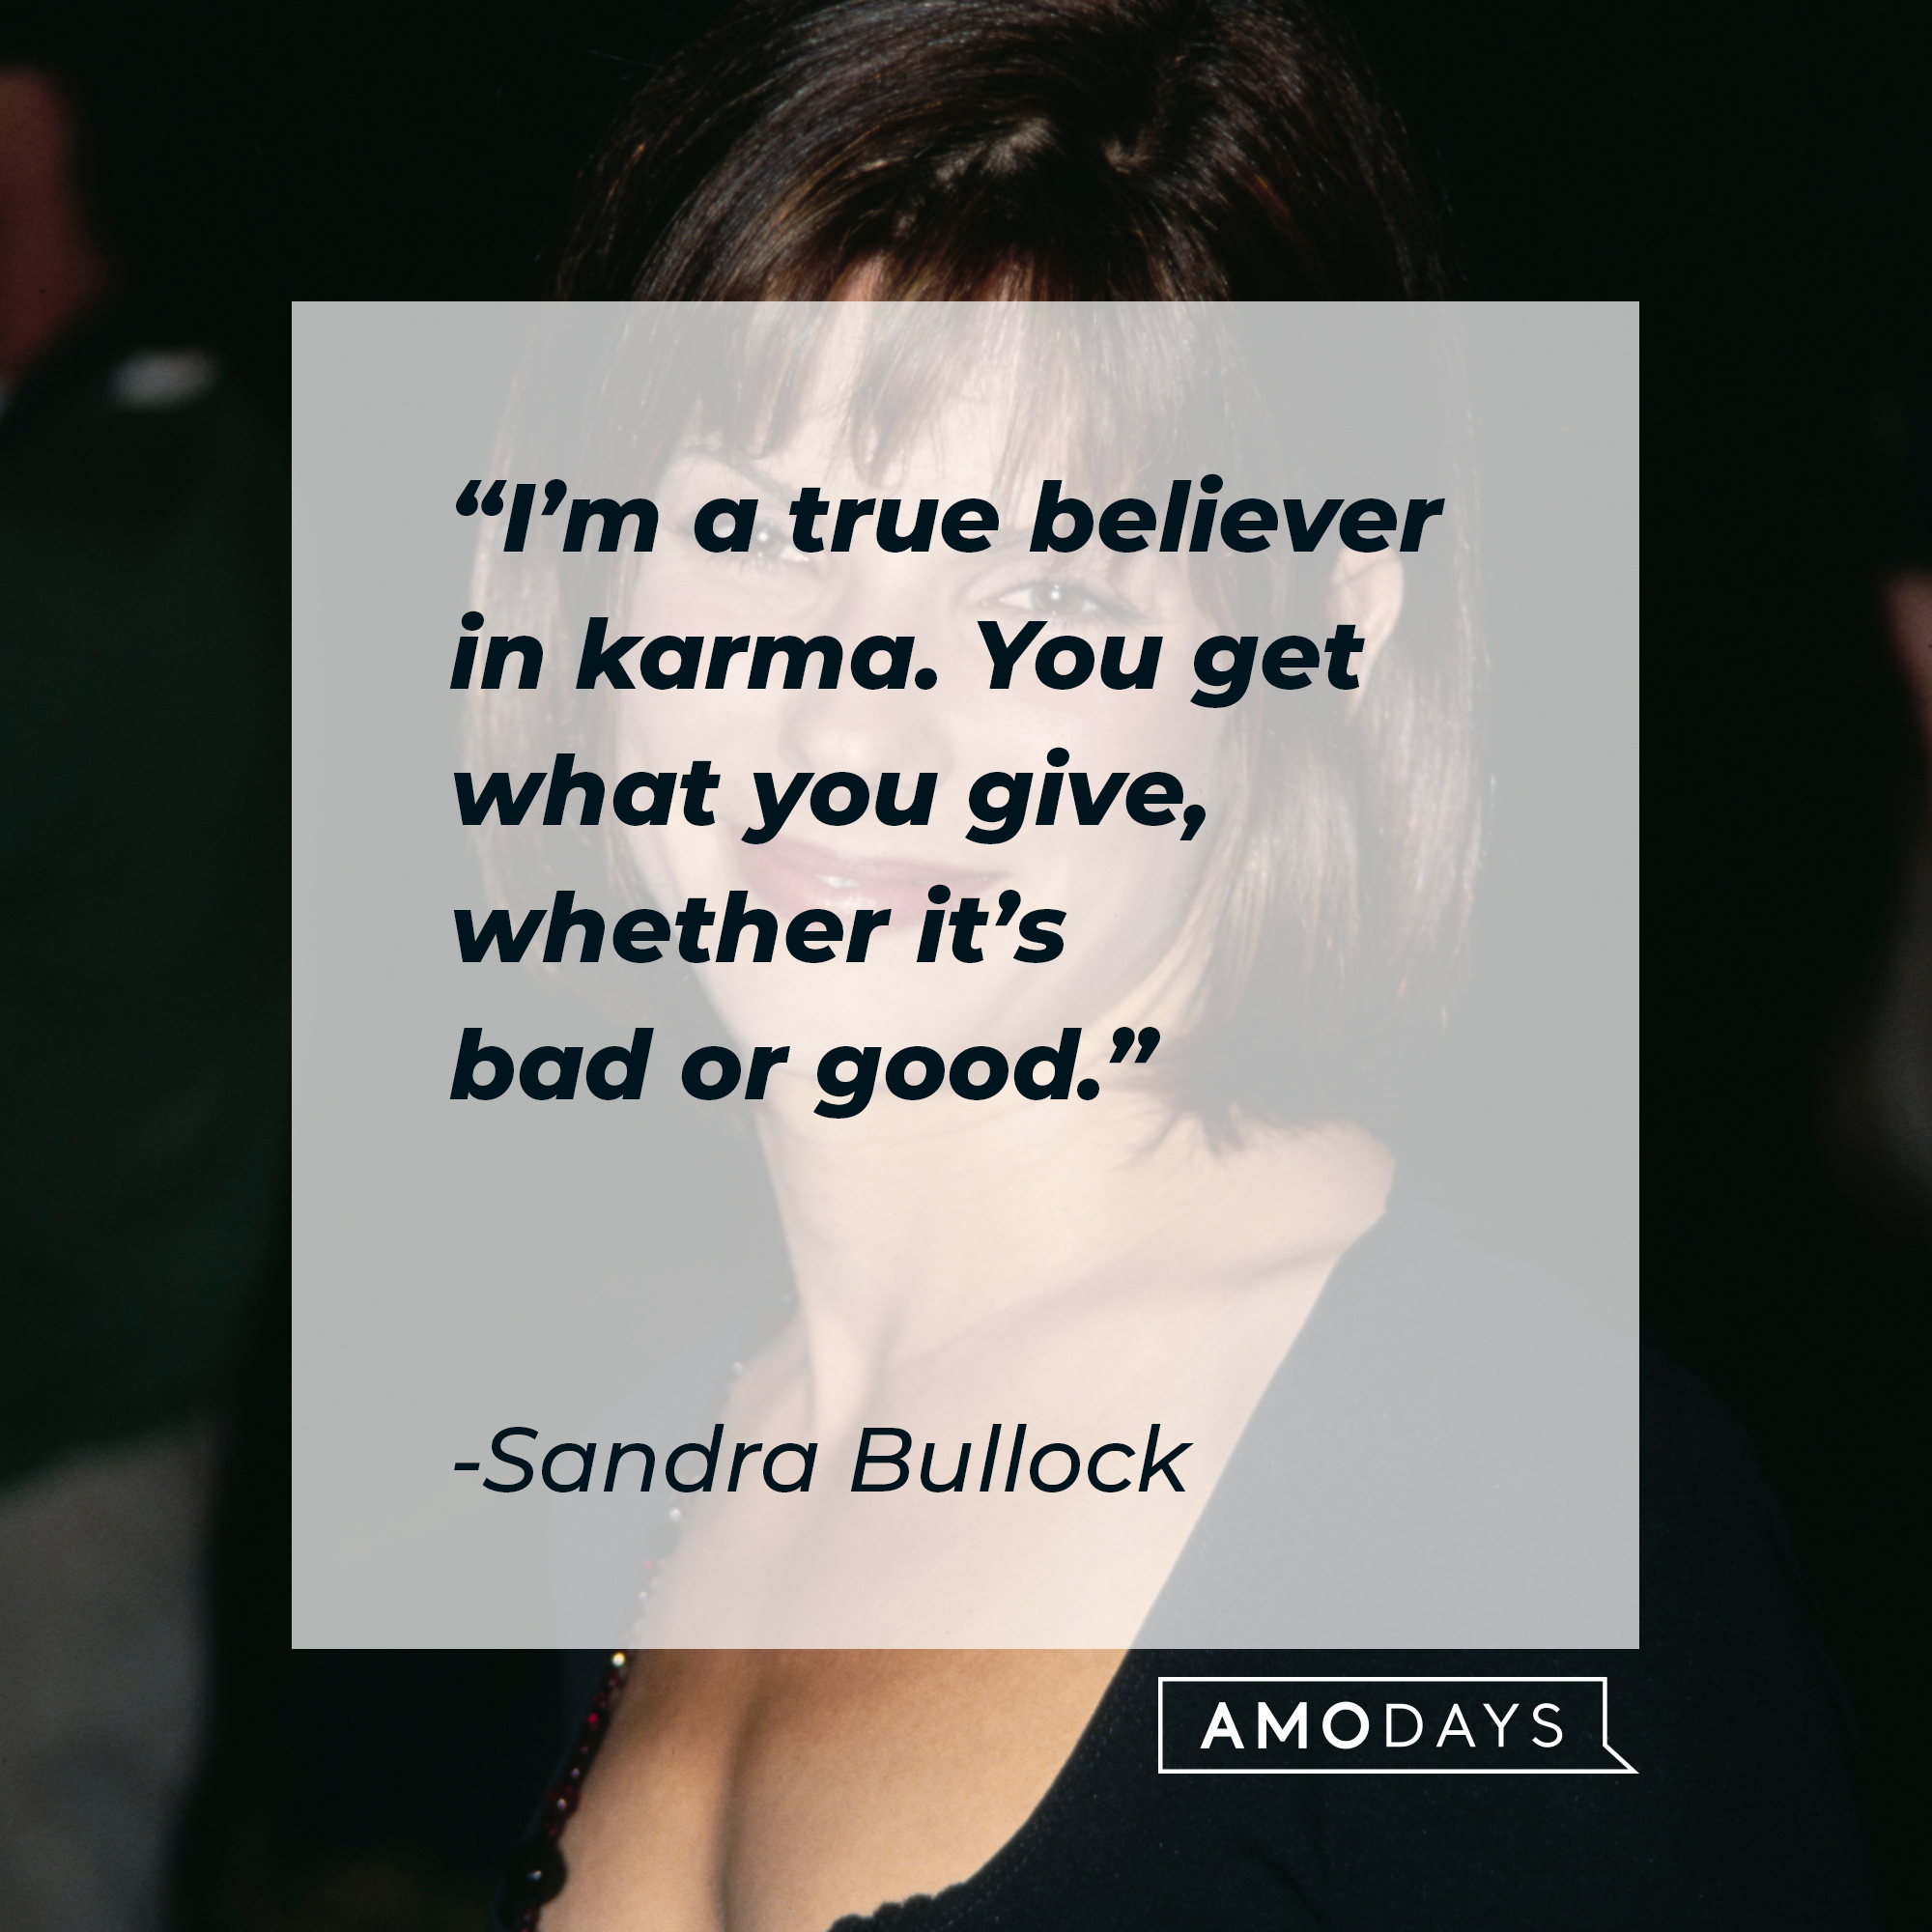 Sandra Bullock's quote: “I’m a true believer in karma. You get what you give, whether it’s bad or good.” | Source: Getty Images